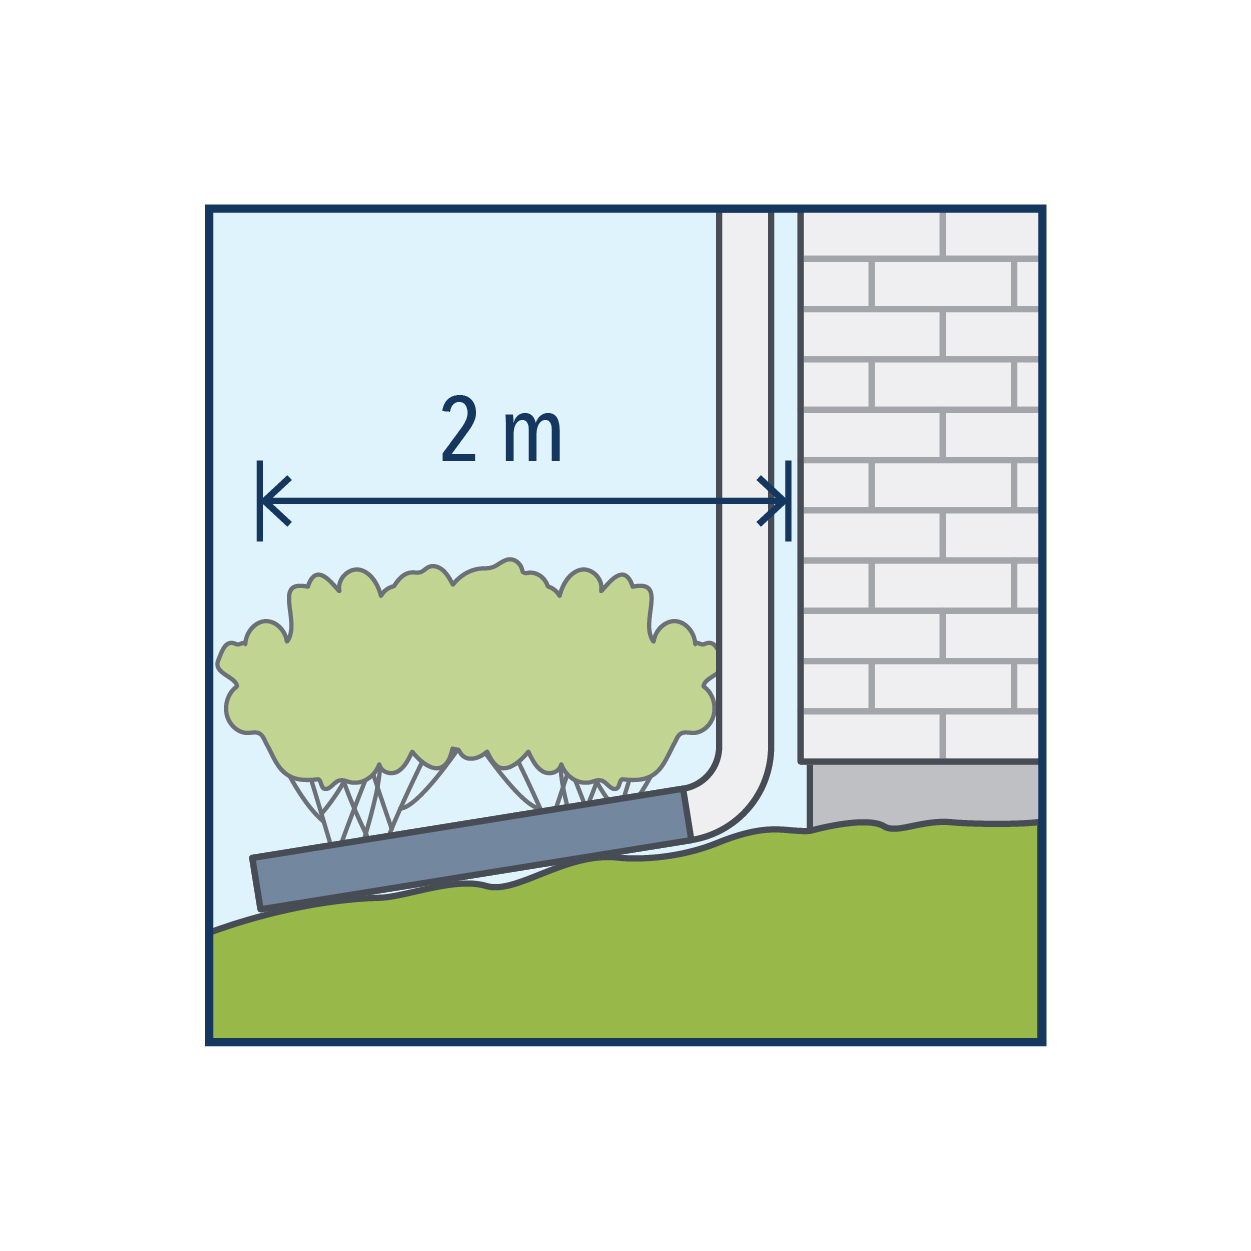 A house with a downspout and a 2 meter arrow showing that water should flow away from your home